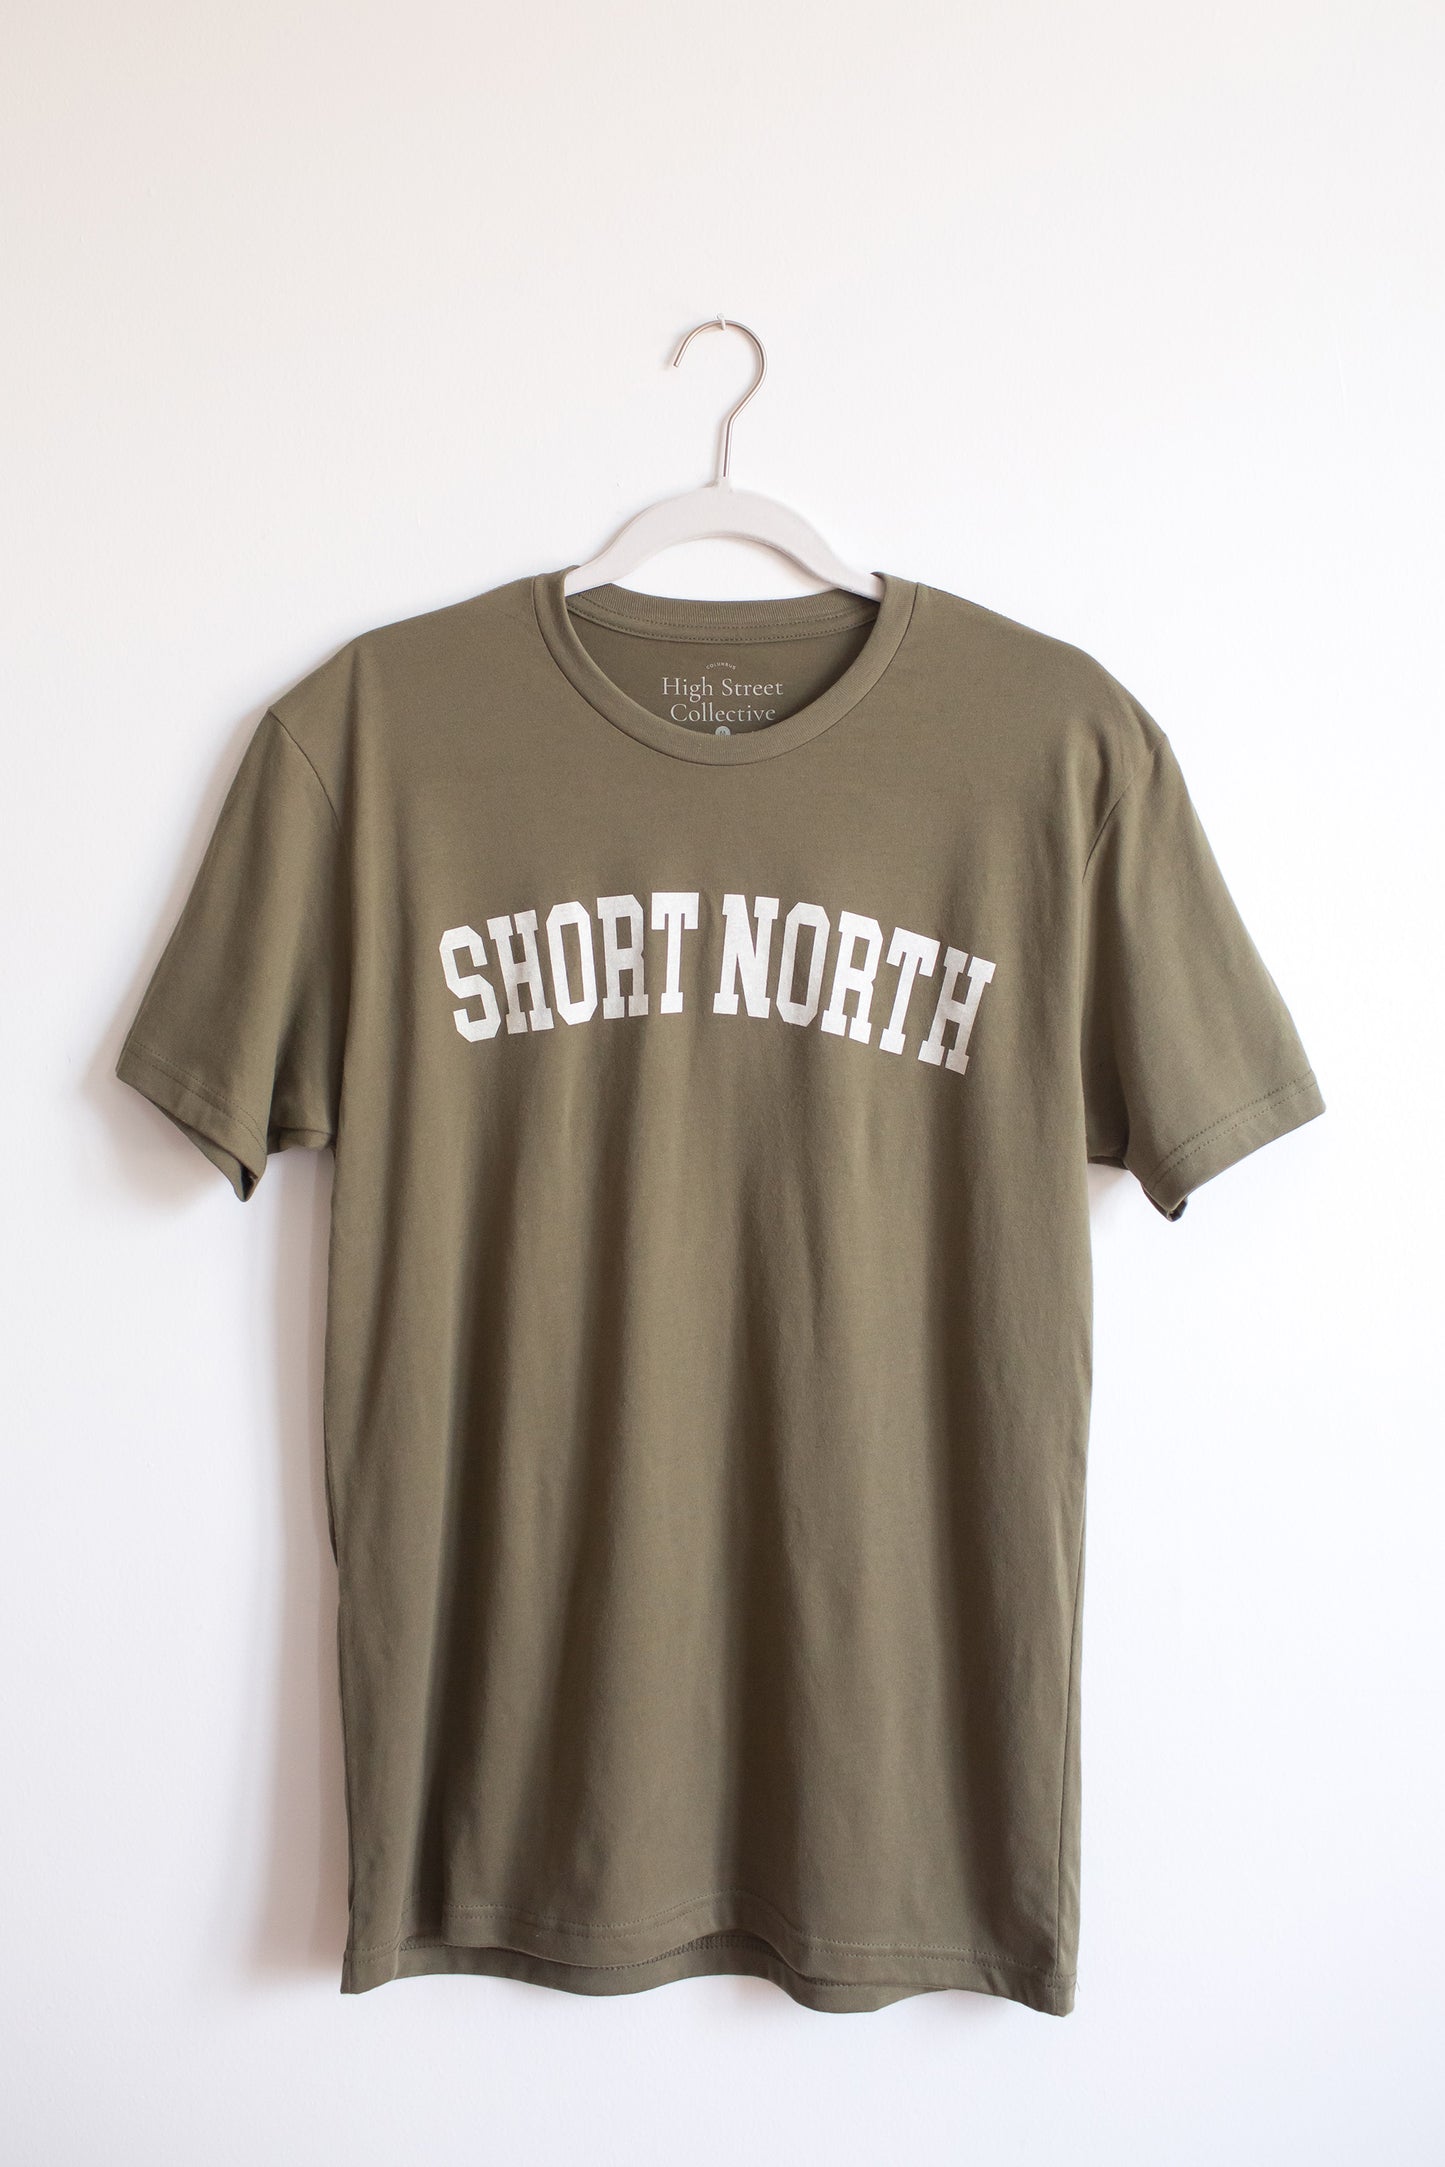 Dusty green sueded crewneck tee with white Short North graphic at front.